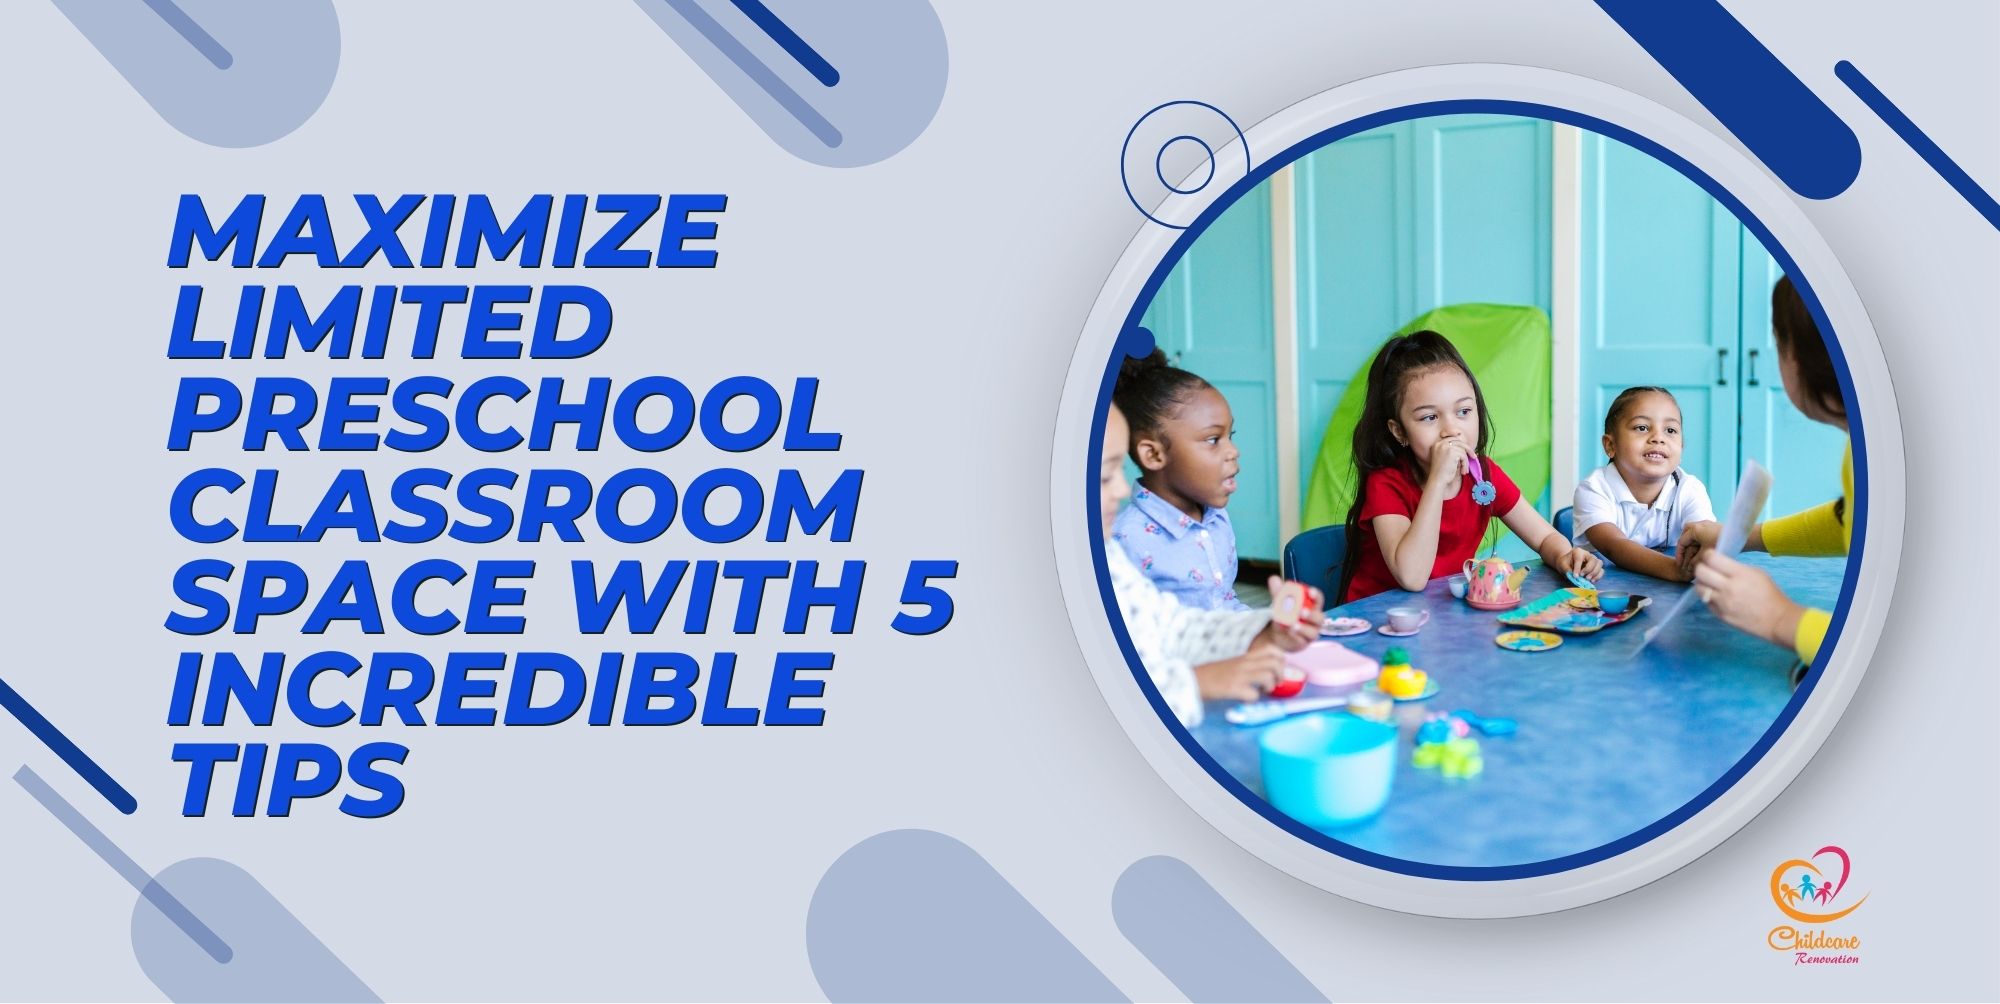 Maximize Limited Preschool Classroom Space With 5 Incredible Tips